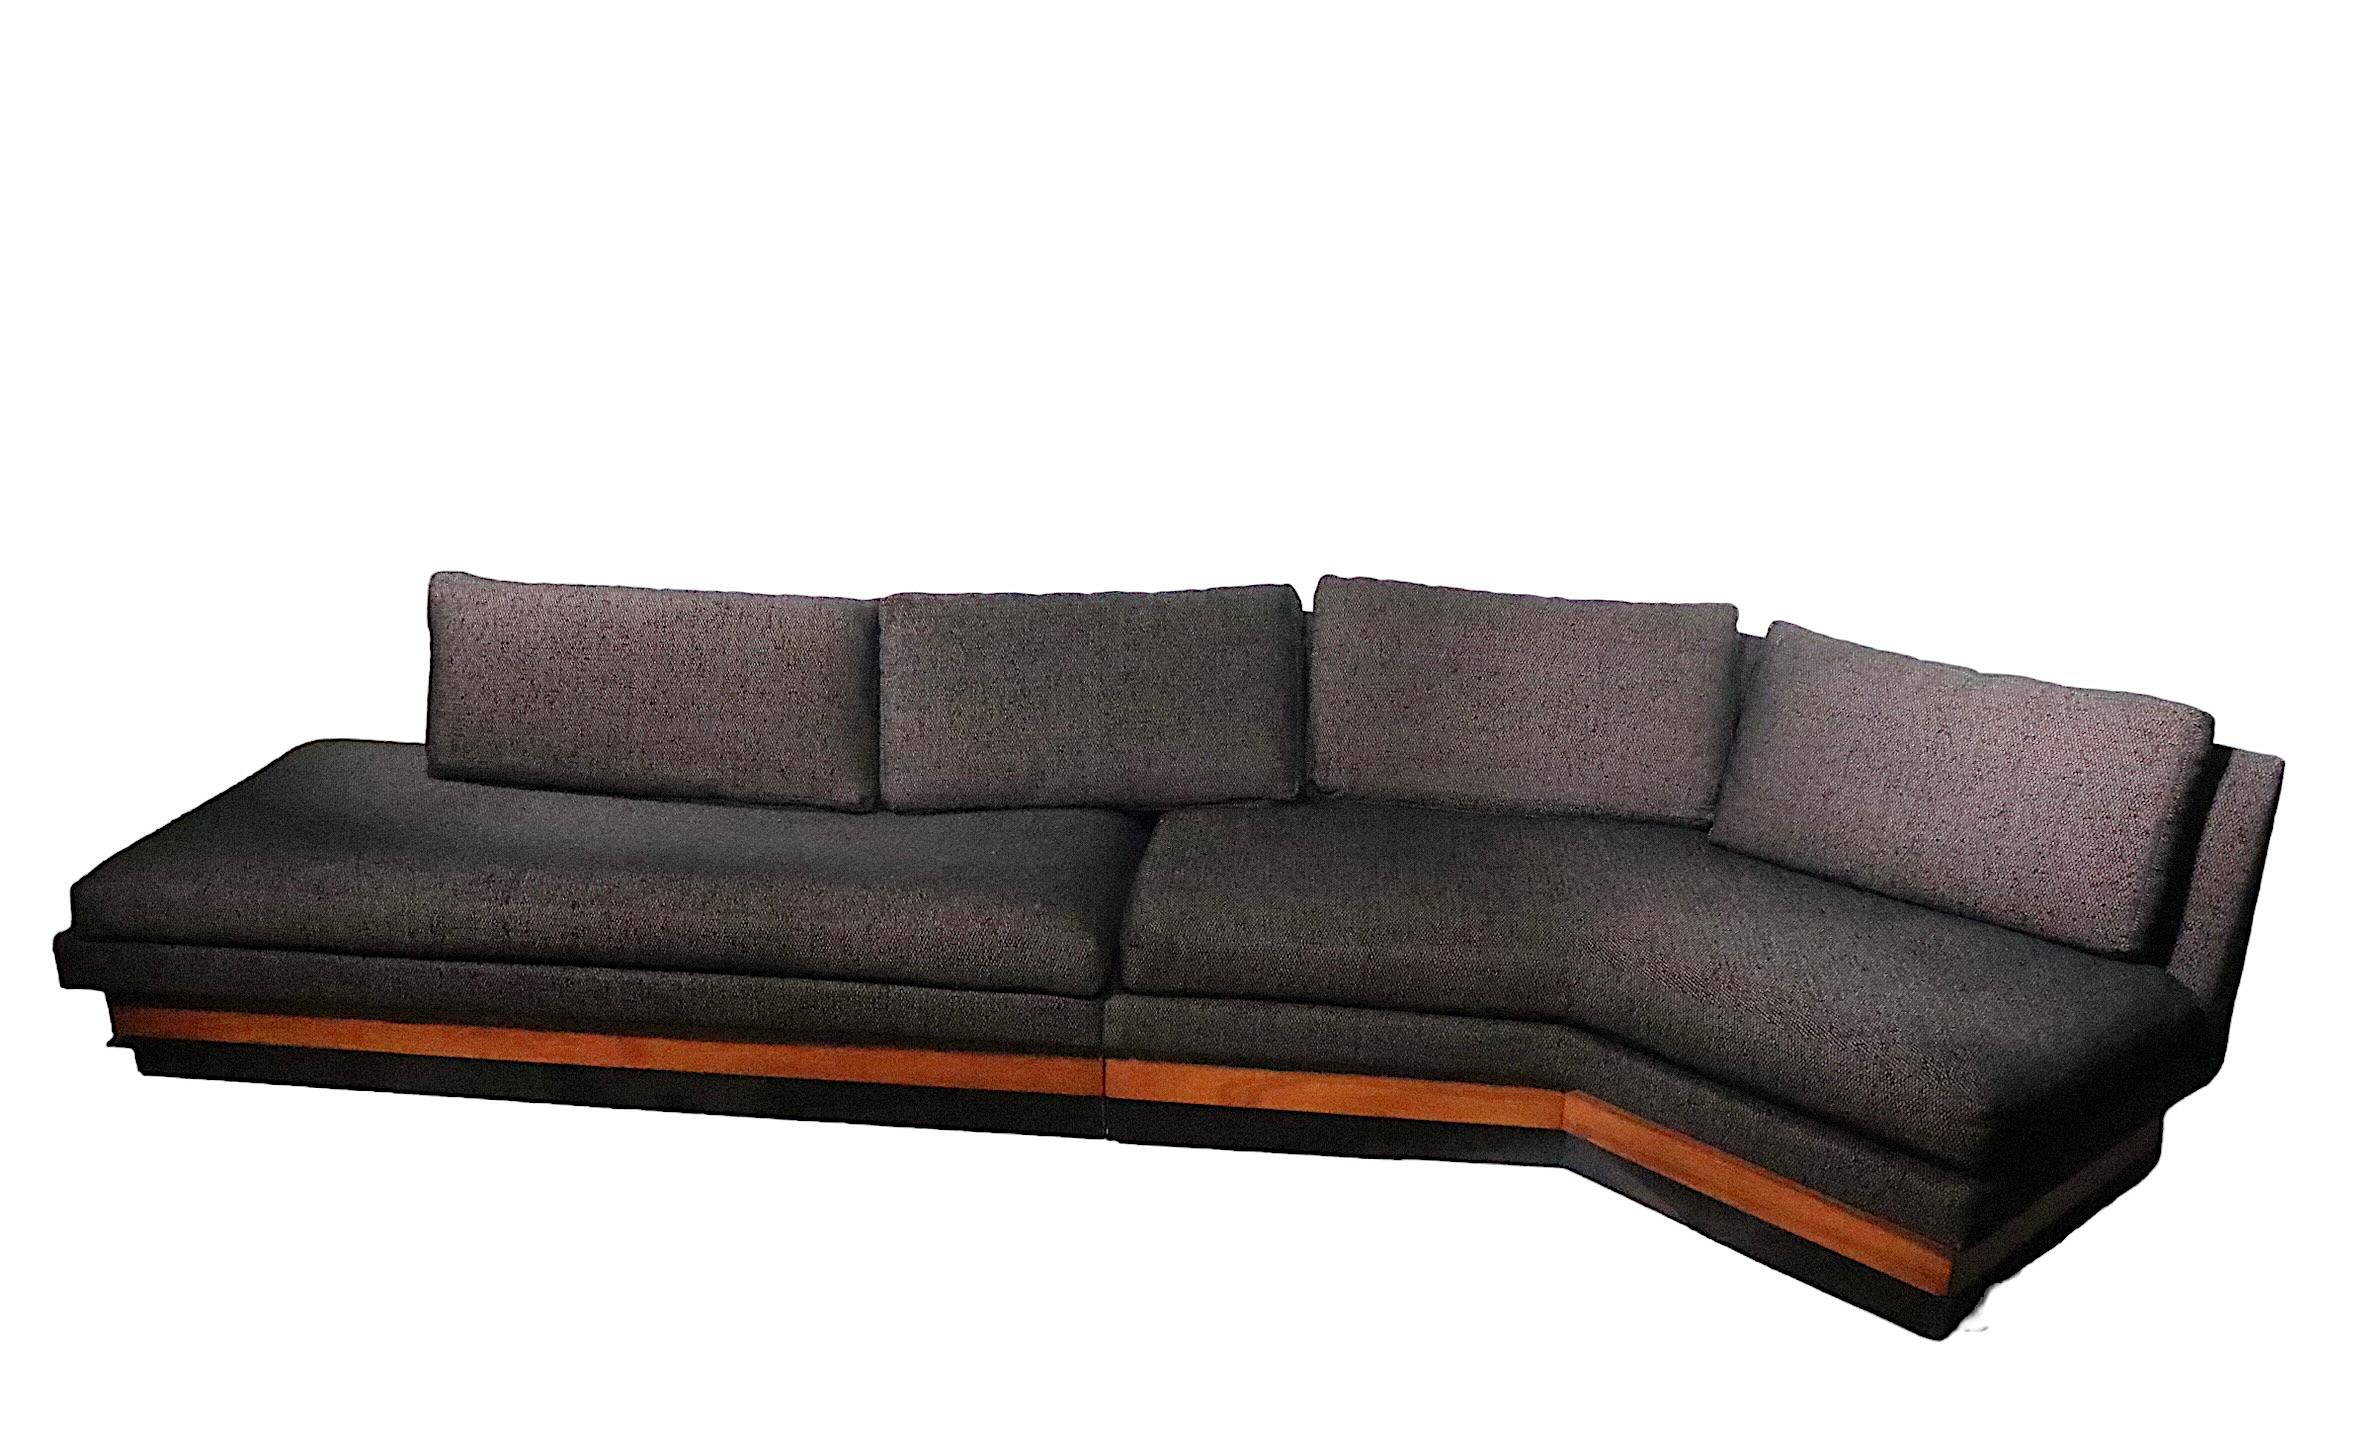 20th Century Mid Century Sectional Sofa by Adrian Pearsall for Craft Associates c 1960's For Sale